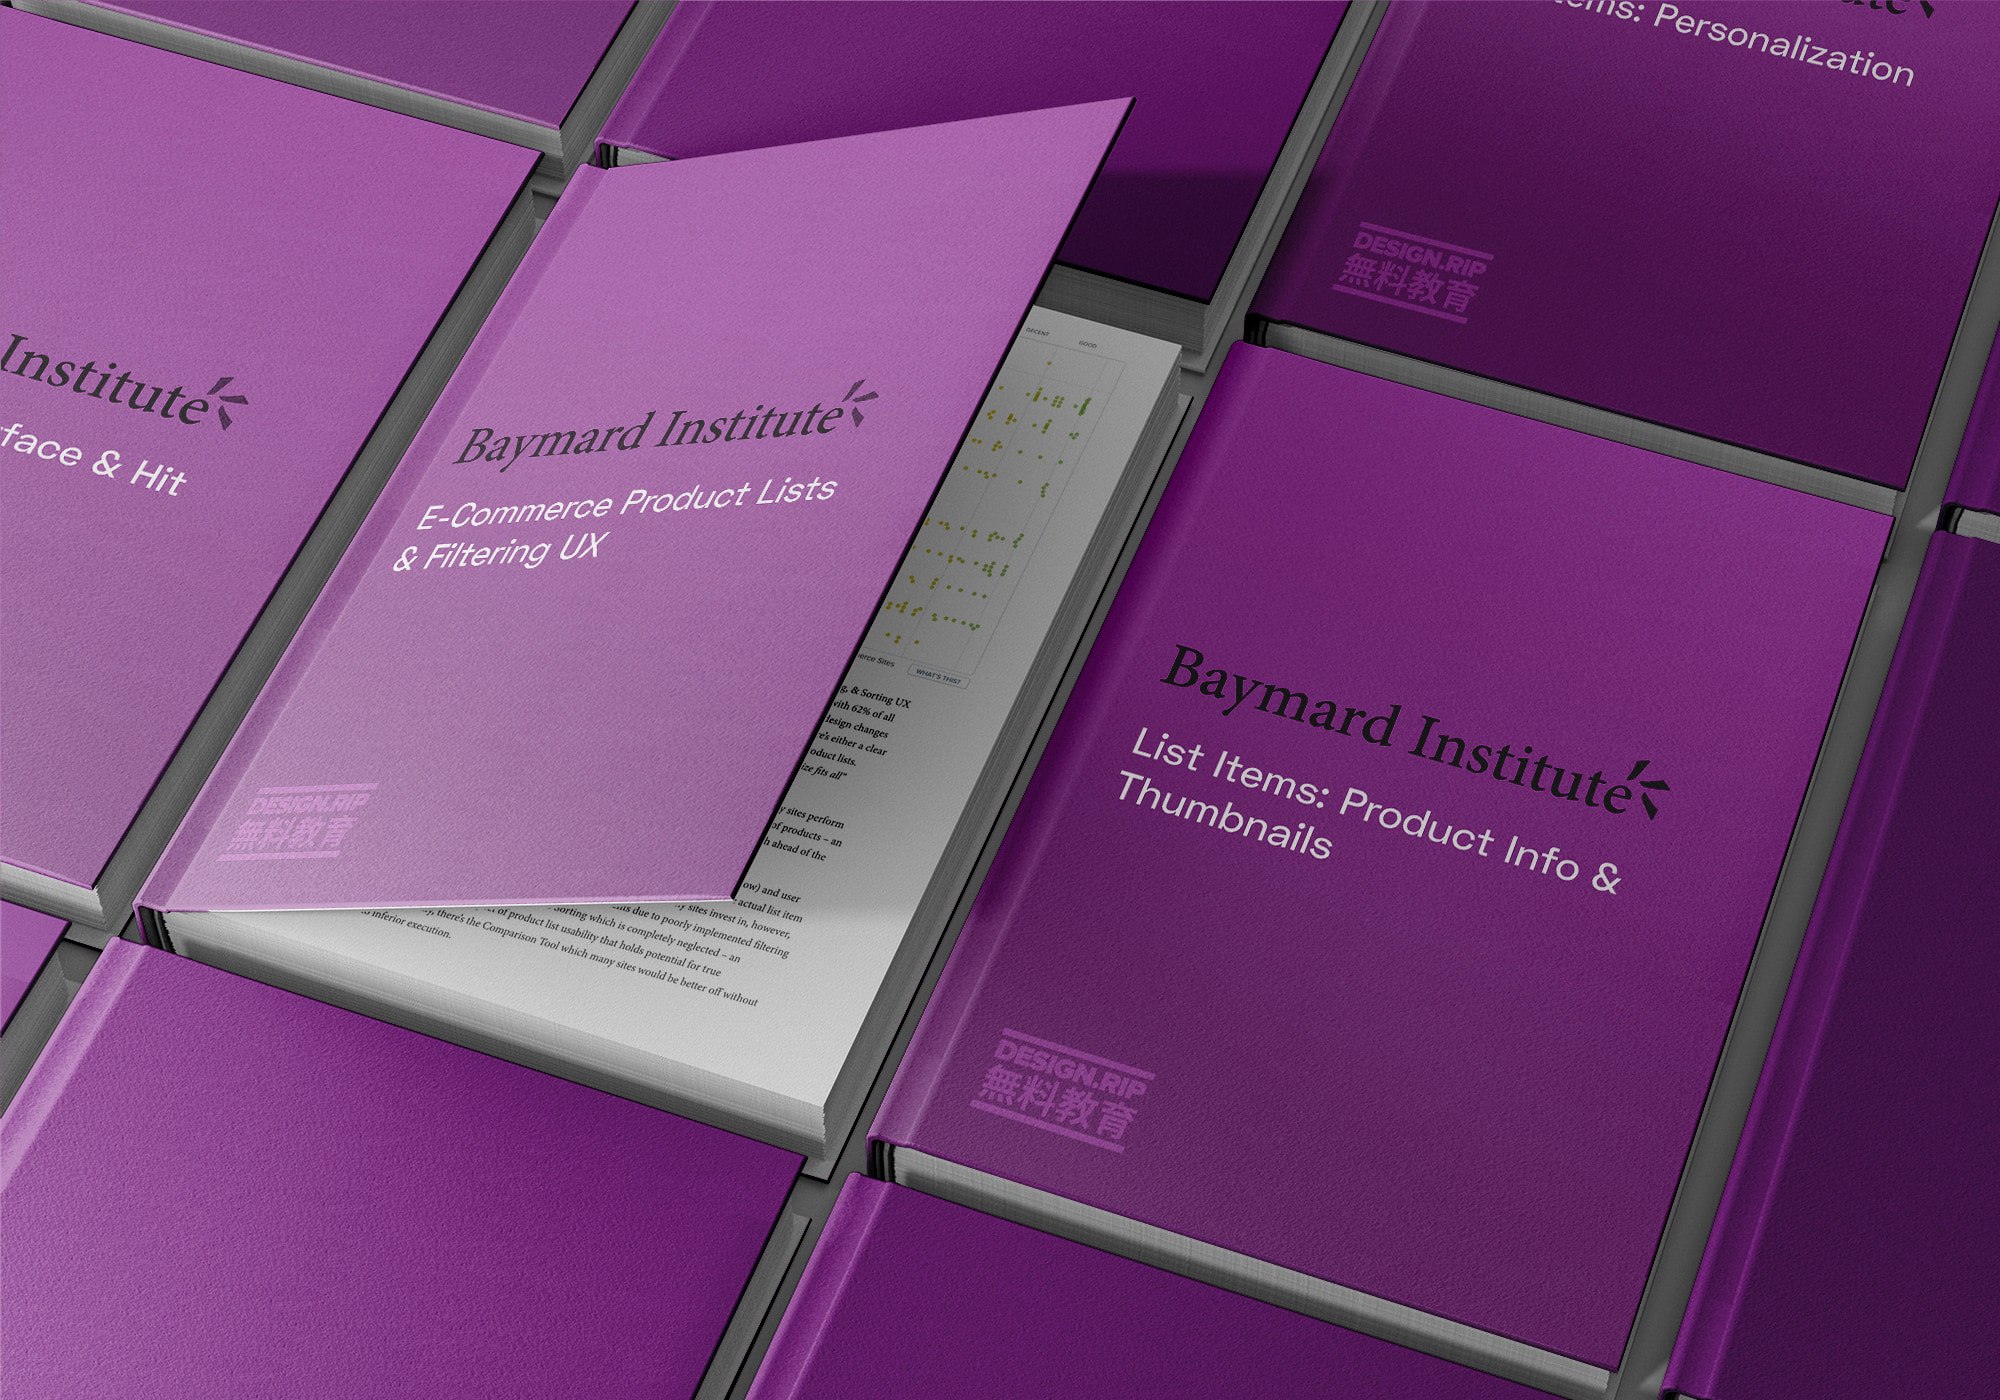 [VIP] Baymard Institute: E-Commerce Product Lists & Filtering UX